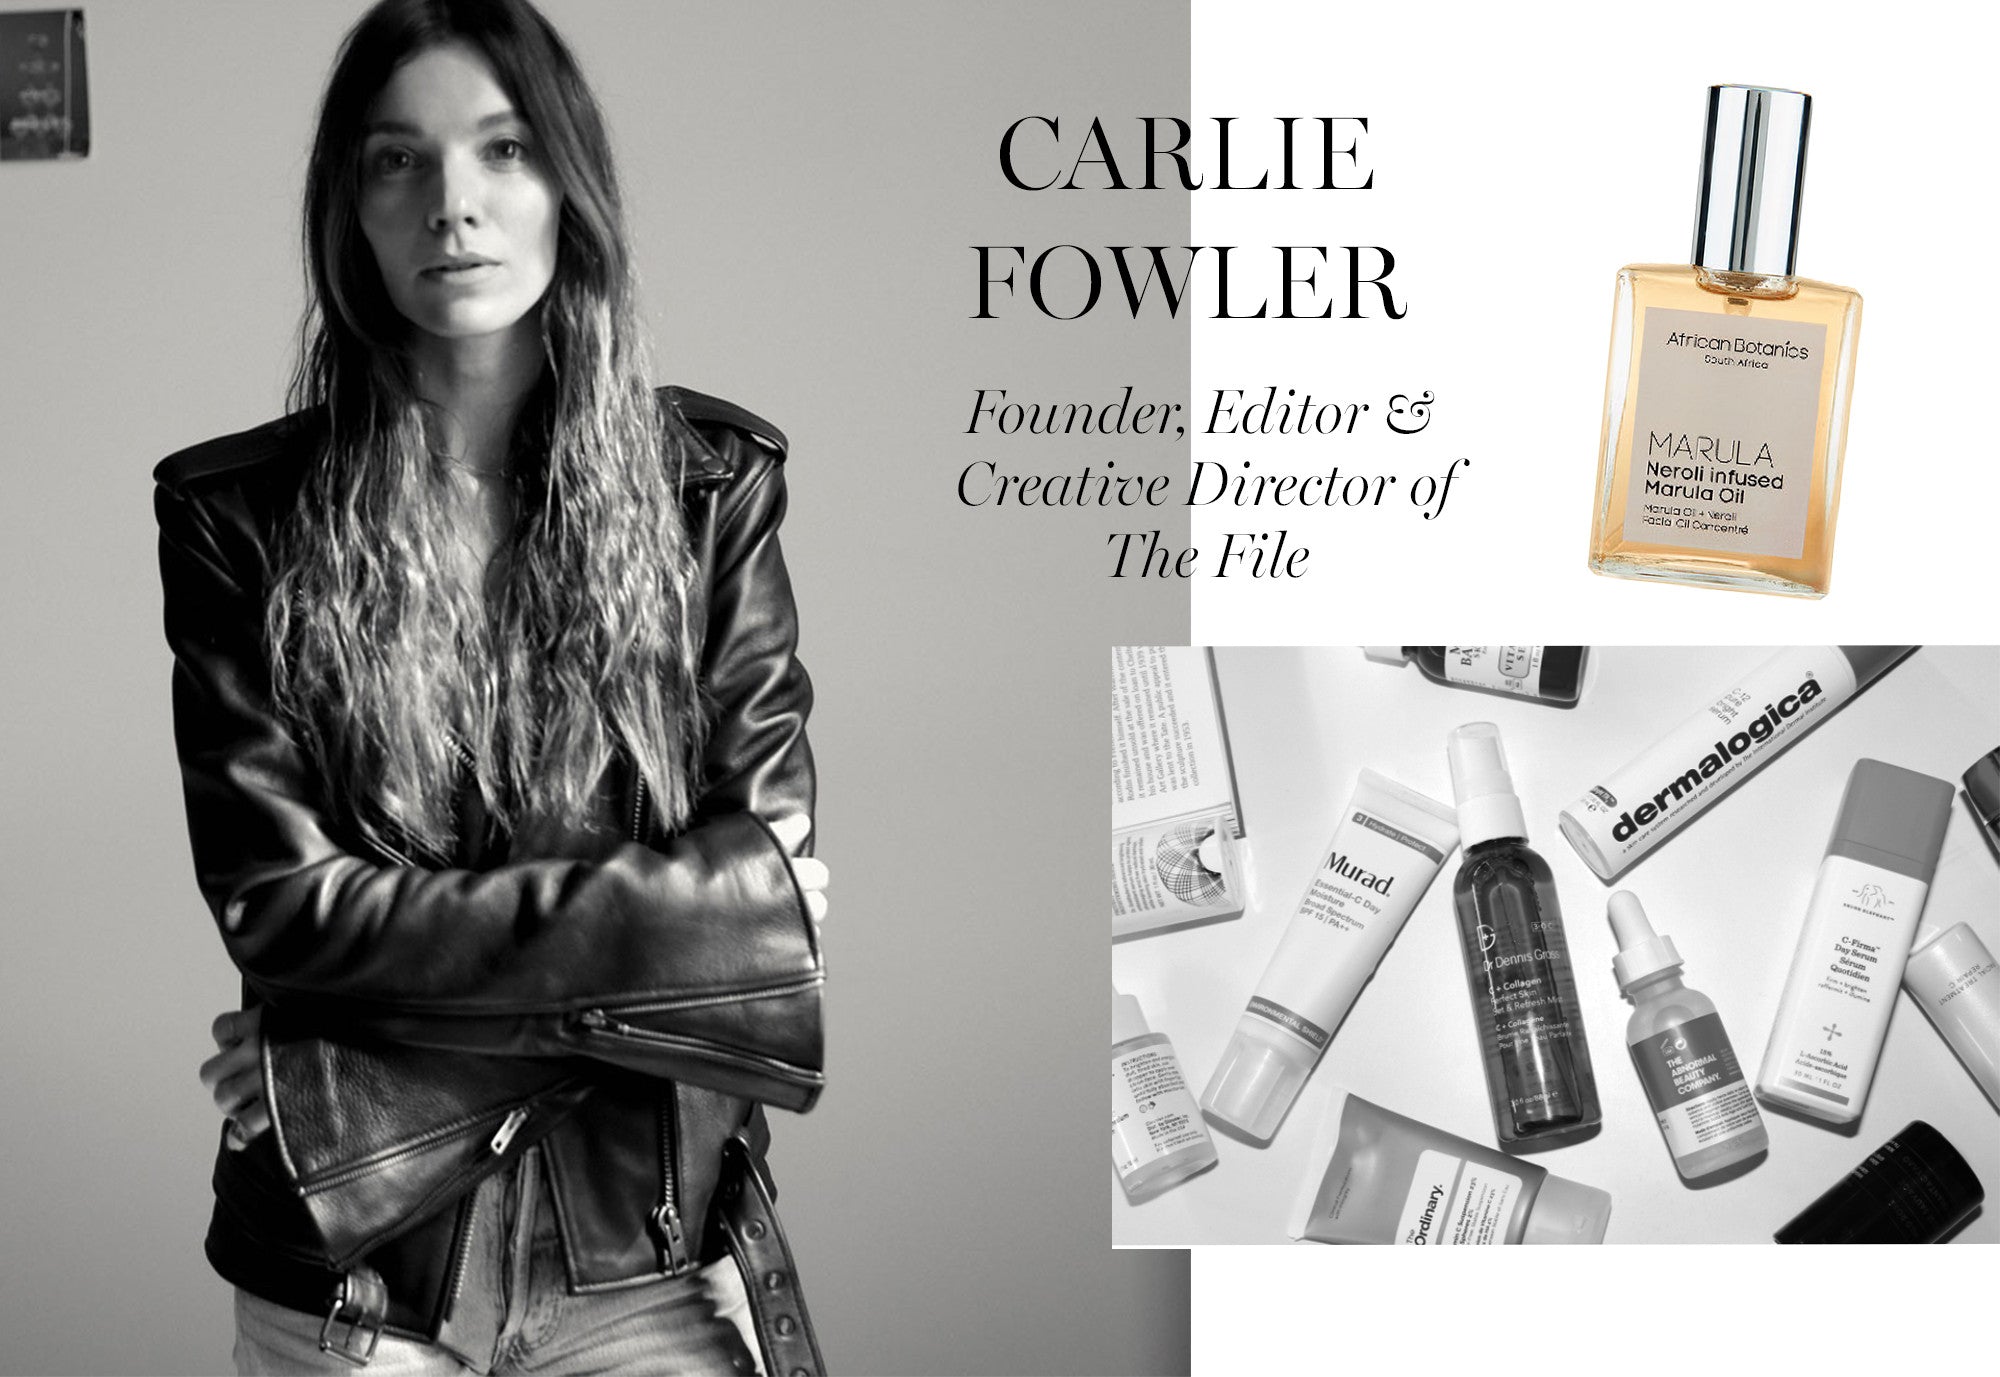 Carlie Fowler, Founder, Editor and Creative Director of The File